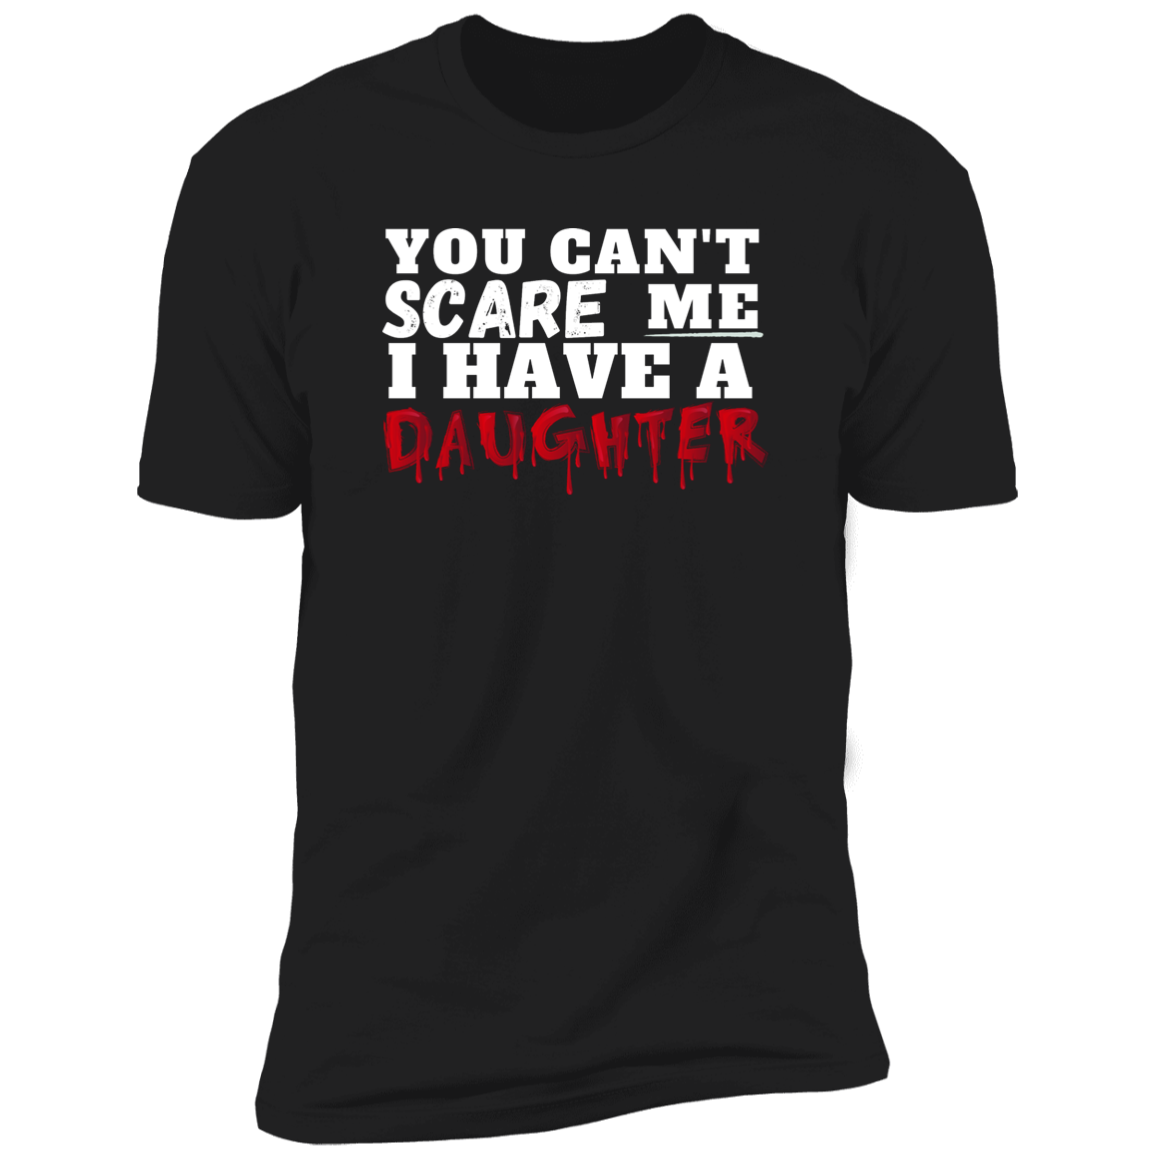 Can't Scare Me | Daughter (T-Shirt)